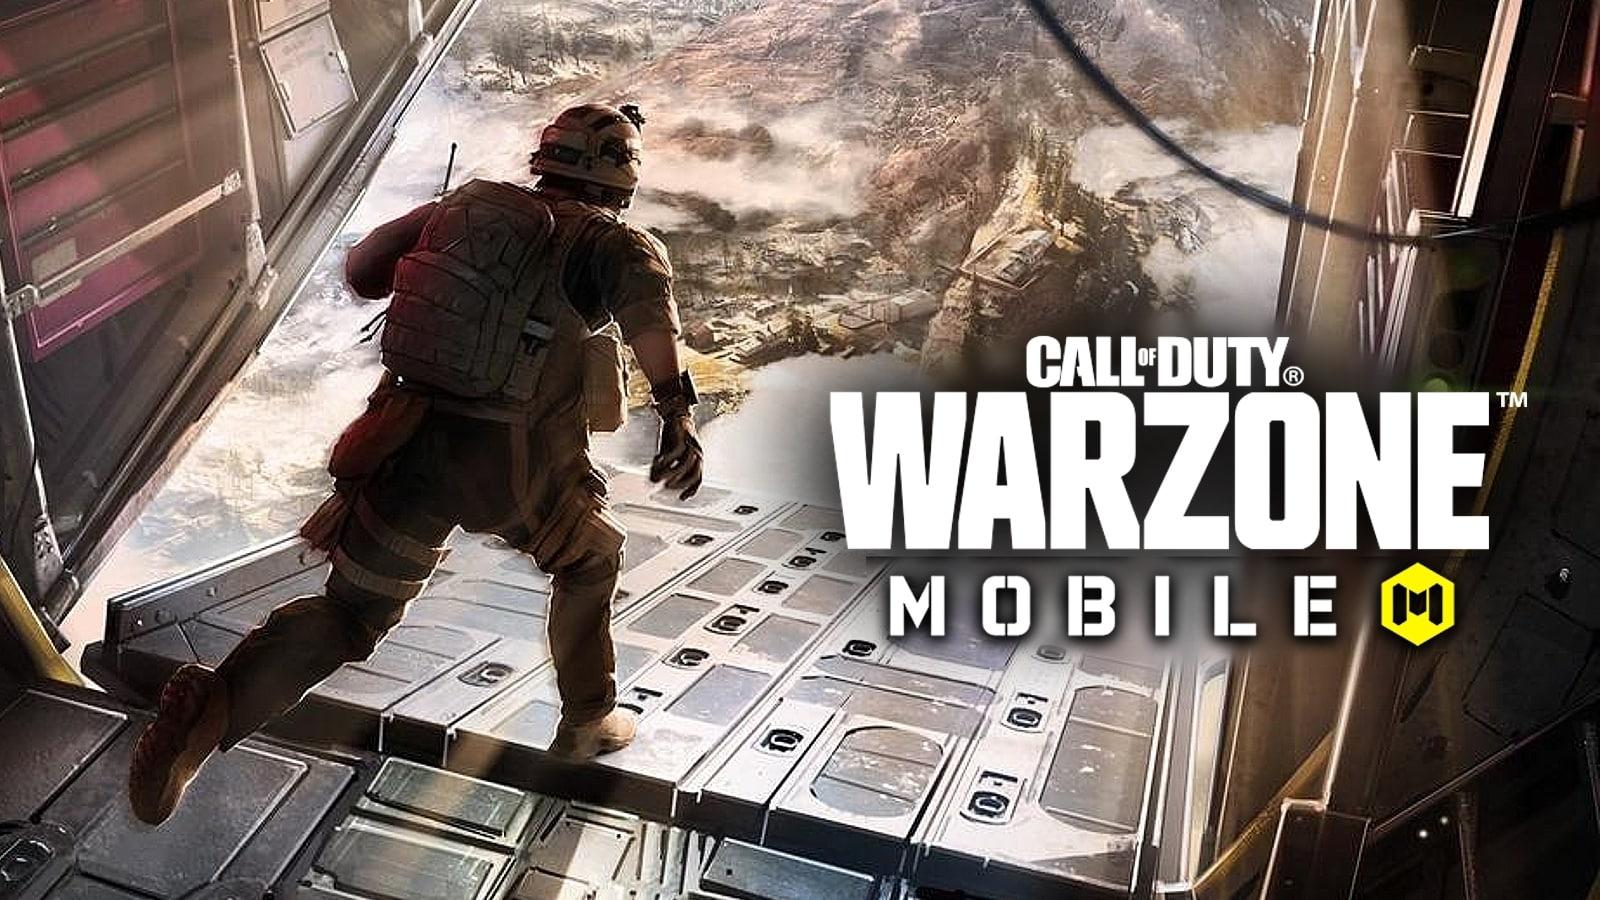 Warzone mobile jumping out of plane